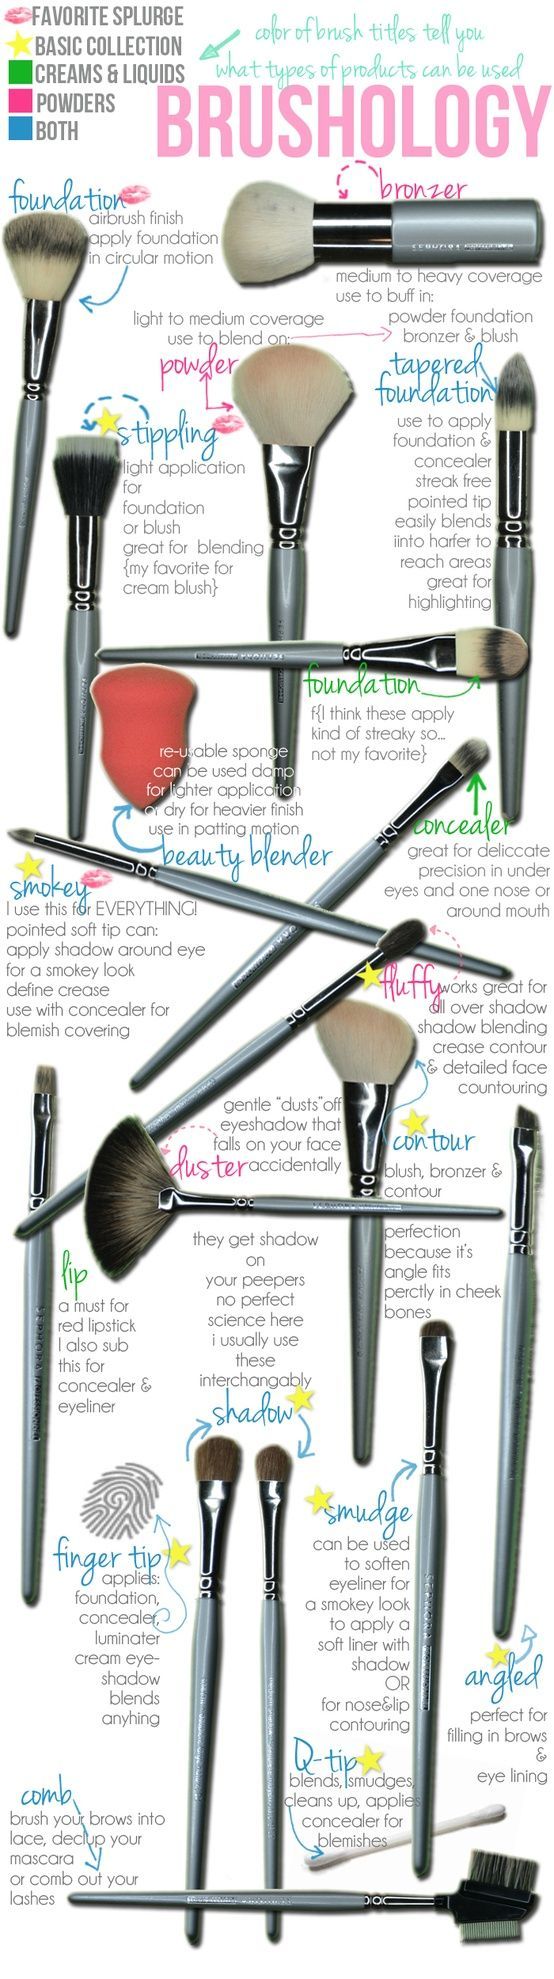 Everything you ever need to know about makeup brushes!